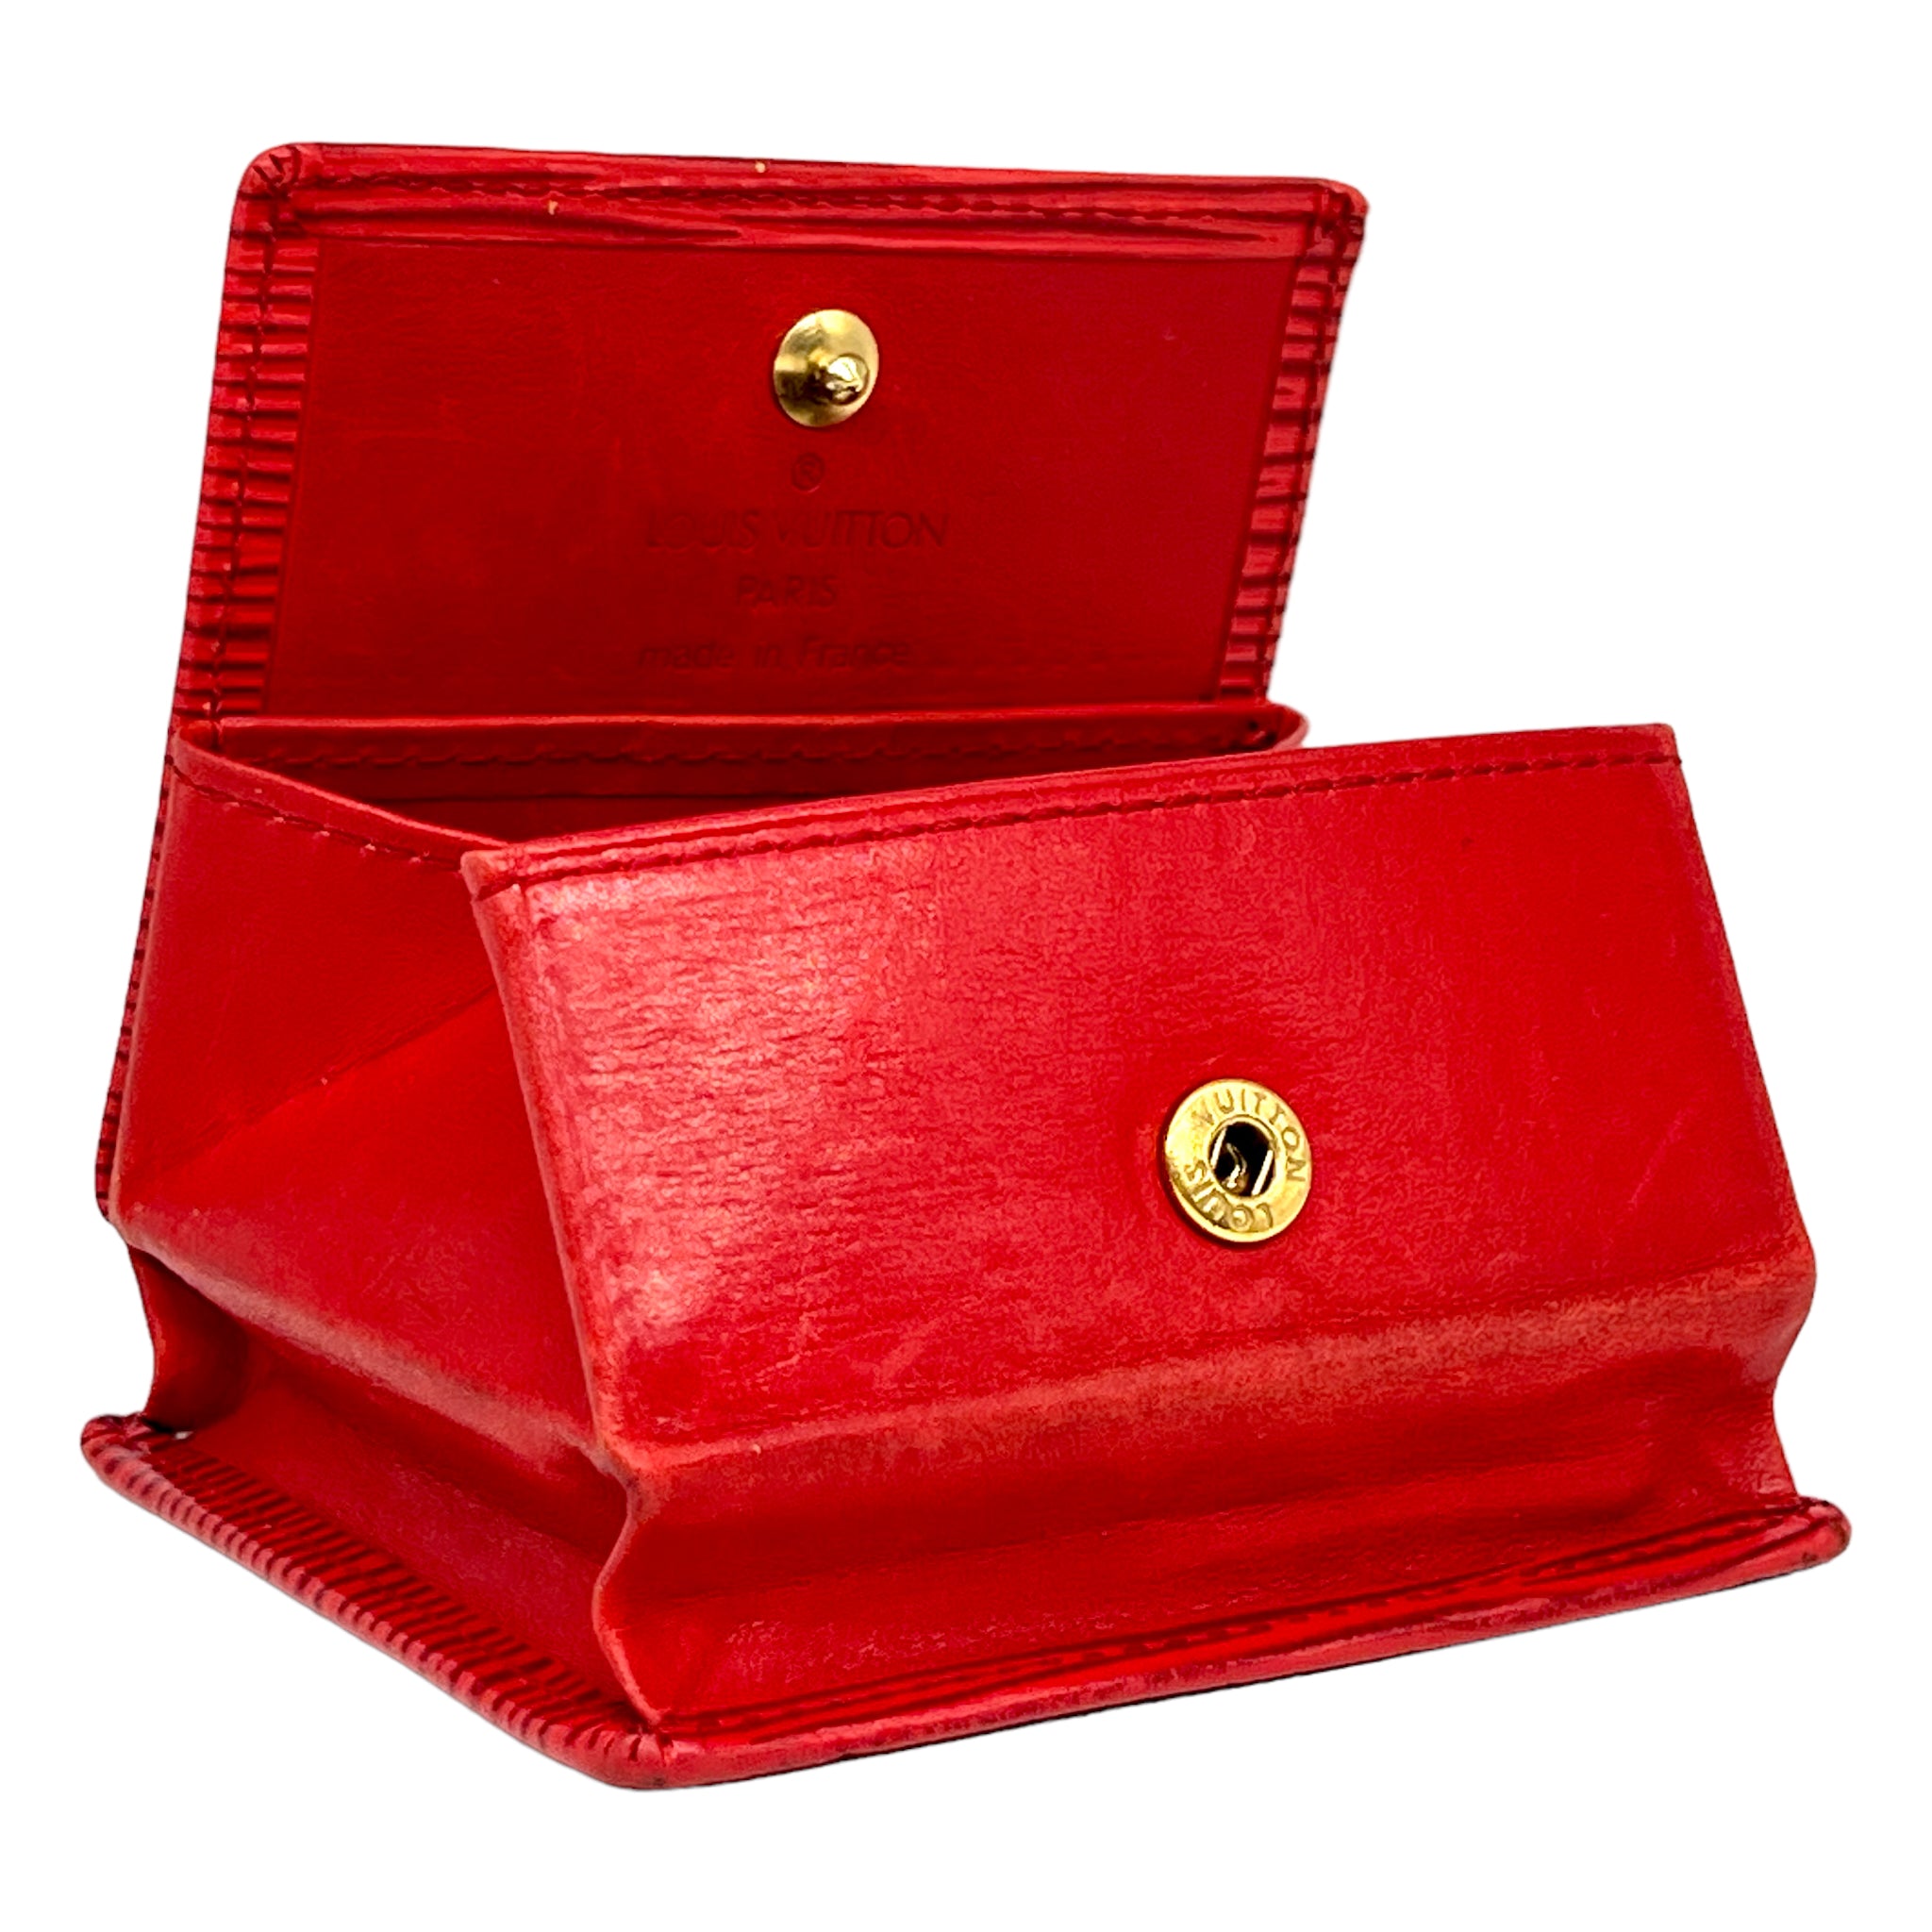 Buy Adamis Black Leather Small Coin Purse (Red) at Amazon.in